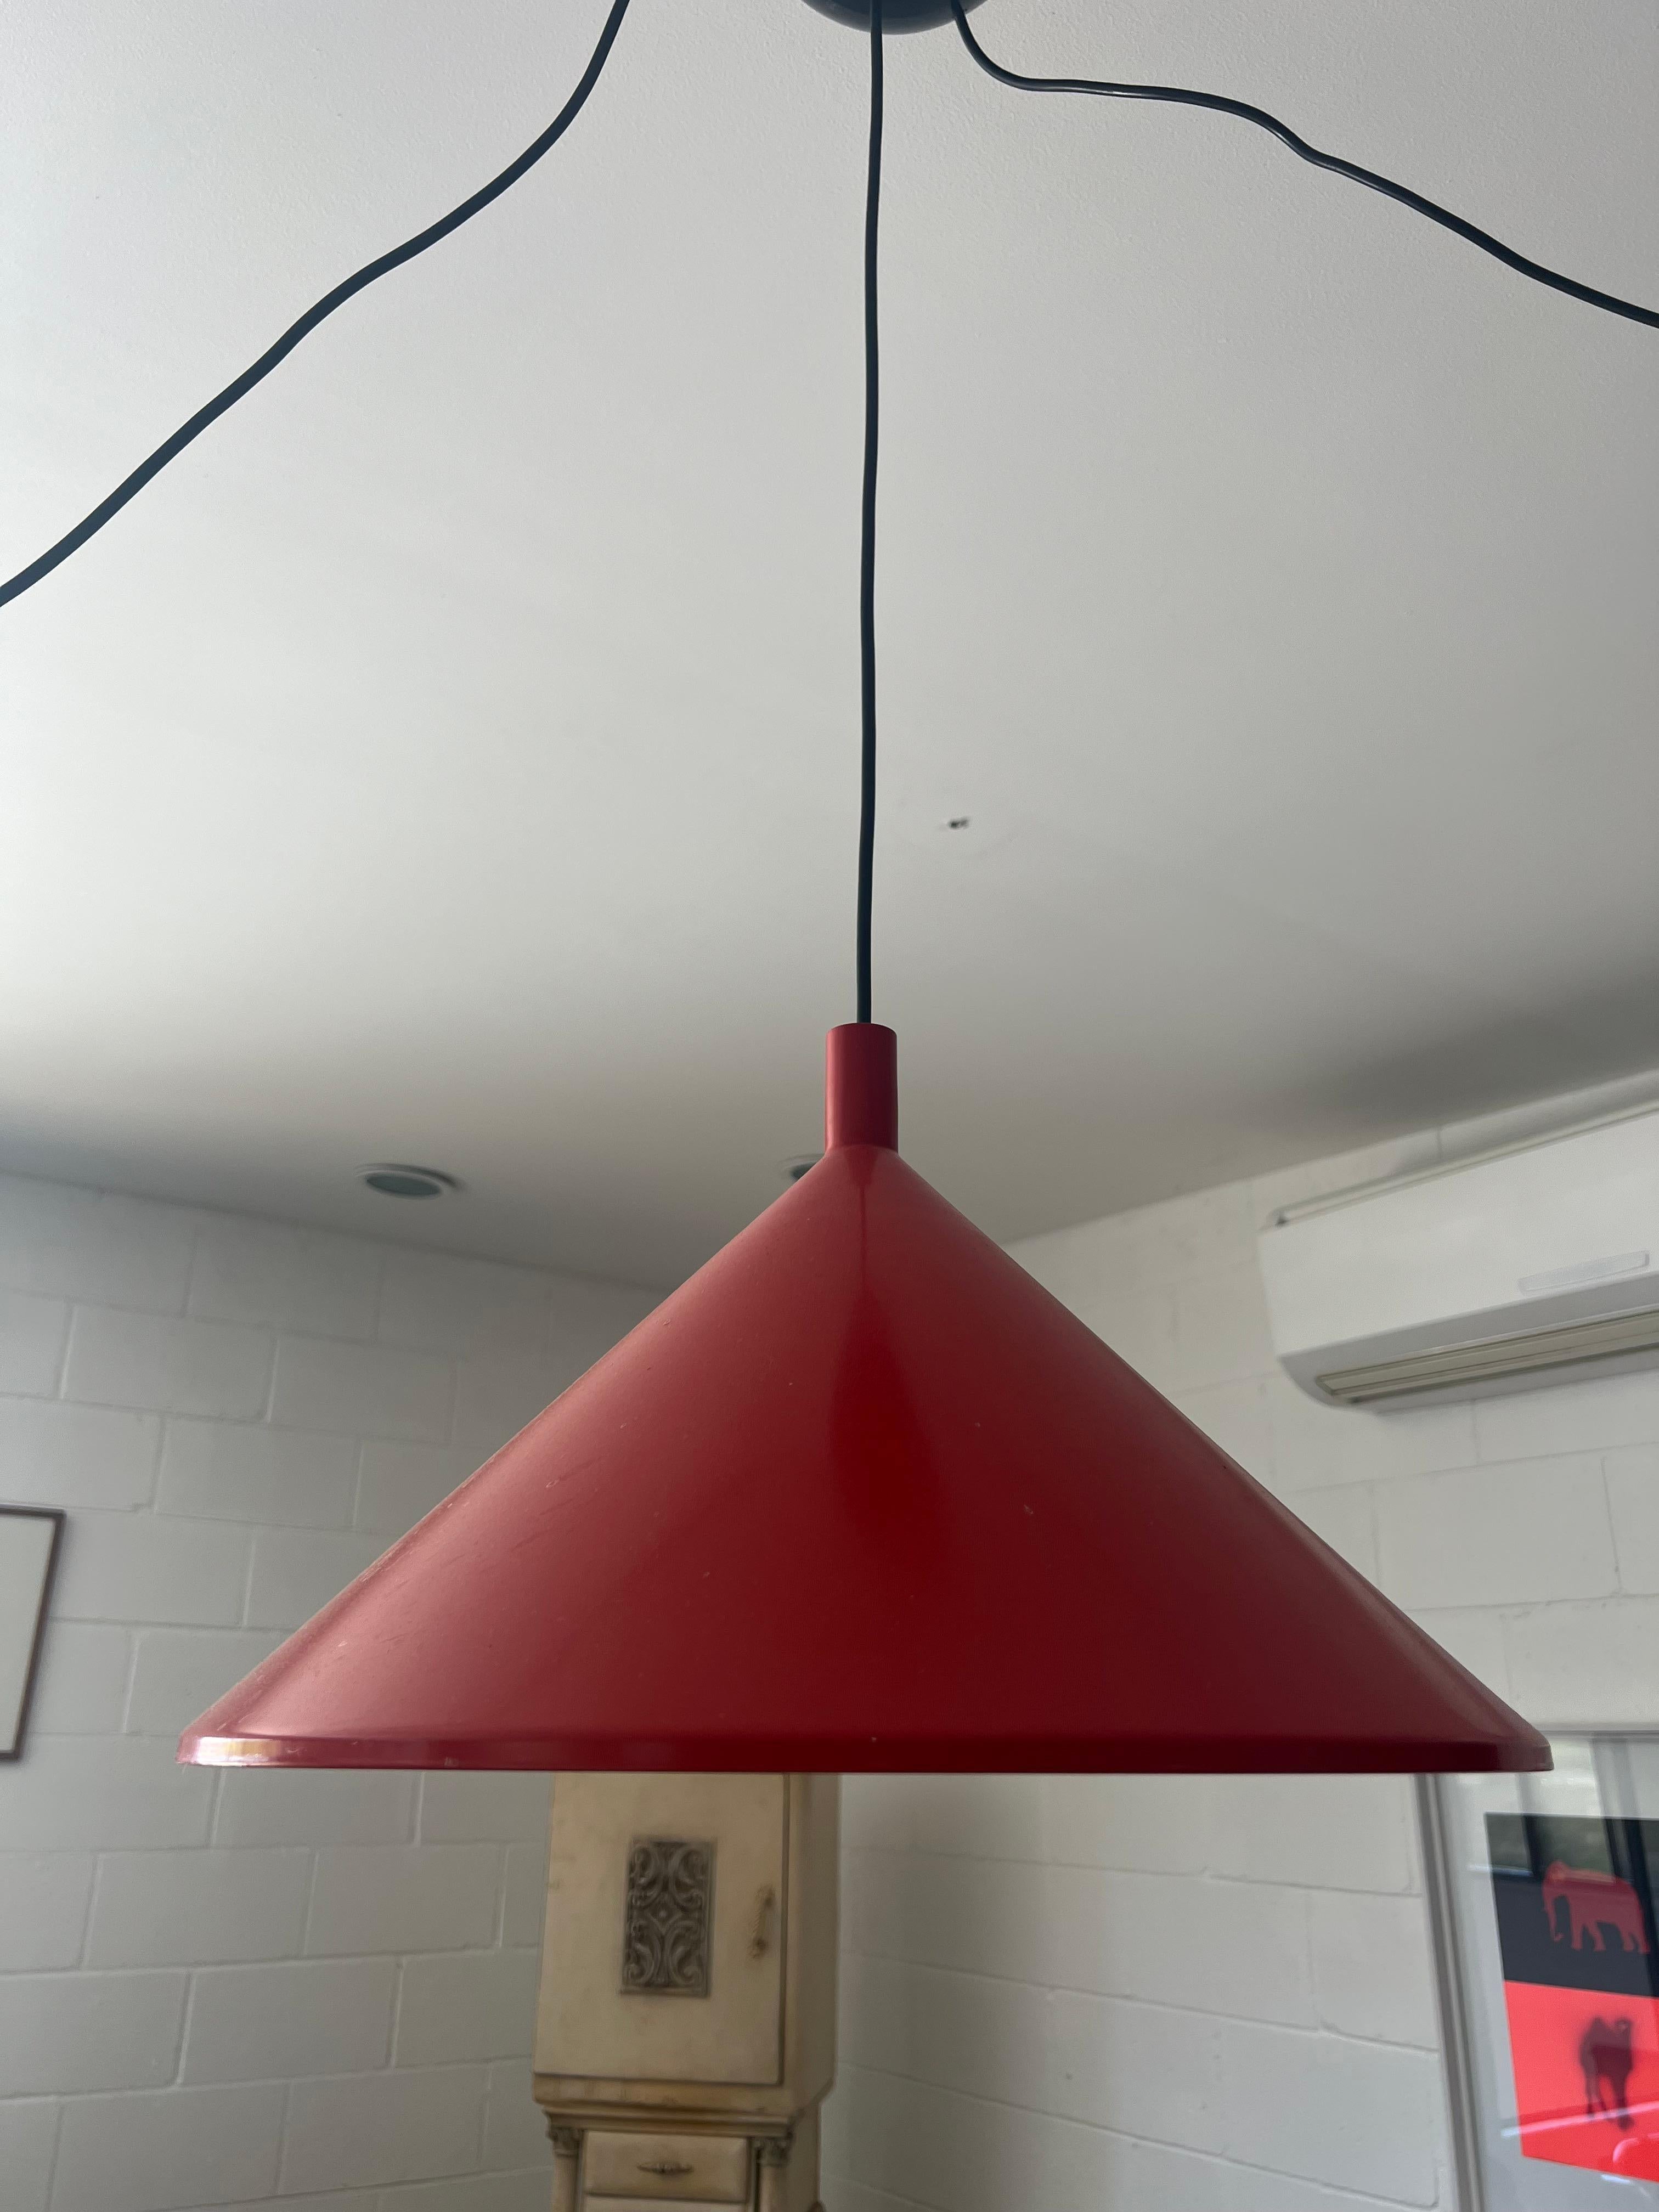 Late 20th Century Mid Century Modern Italian Pair of Pendant Lights by Elio Martinelli  For Sale